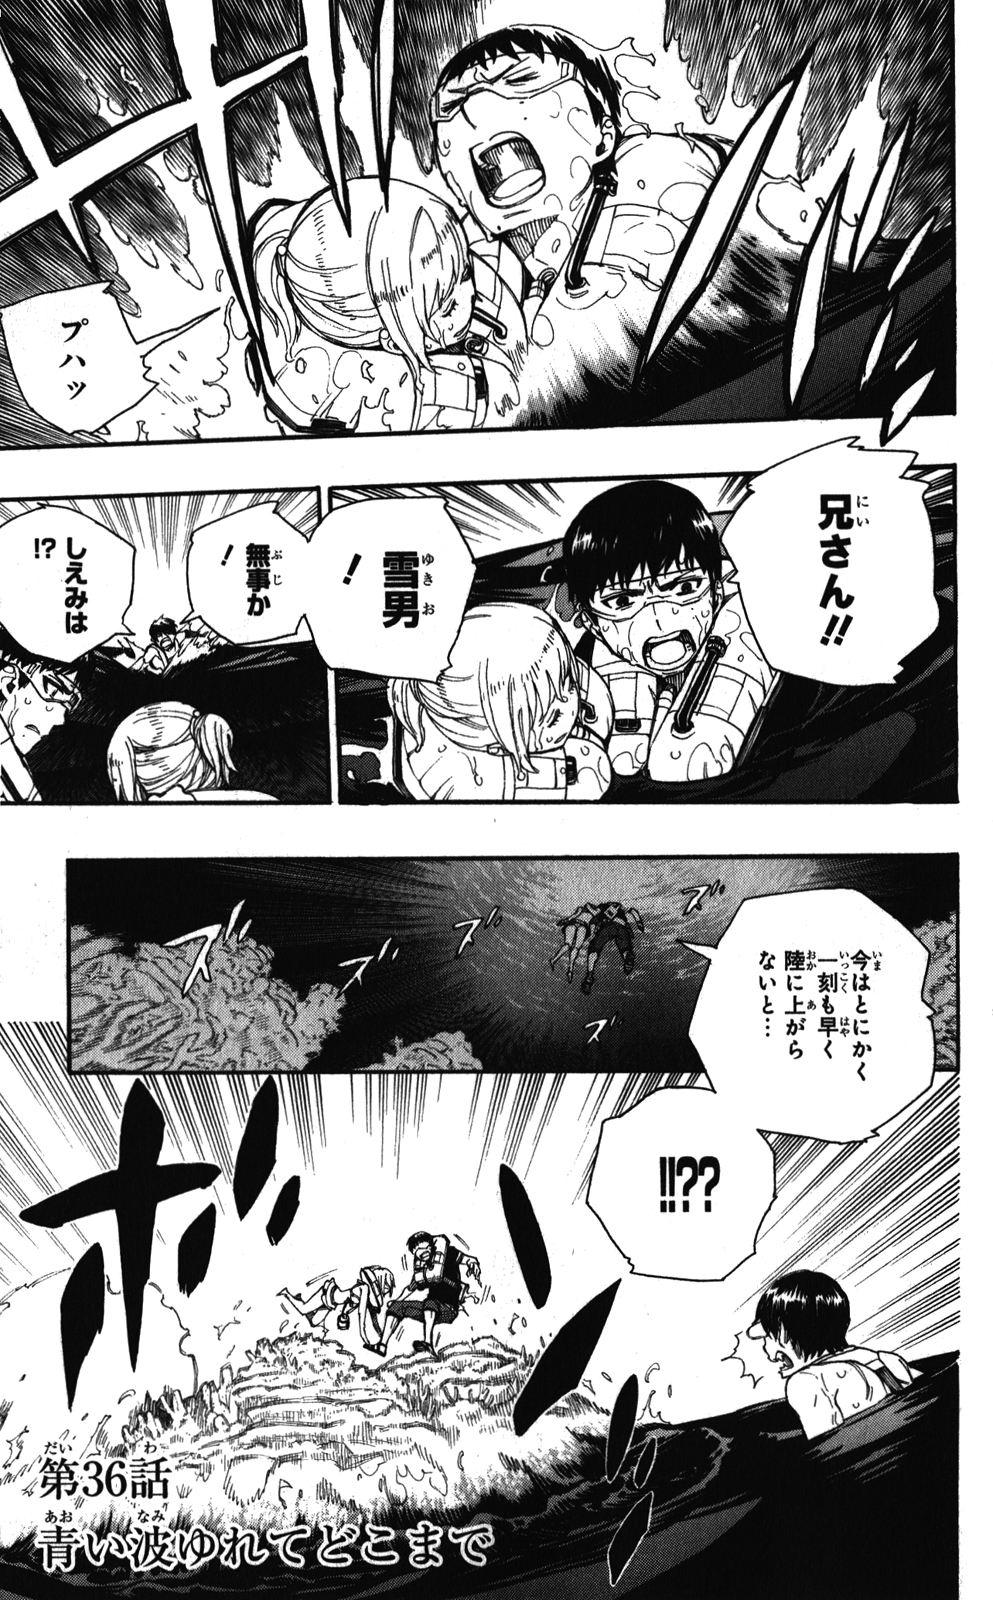 Ao no Exorcist - Chapter 36 - Page 1